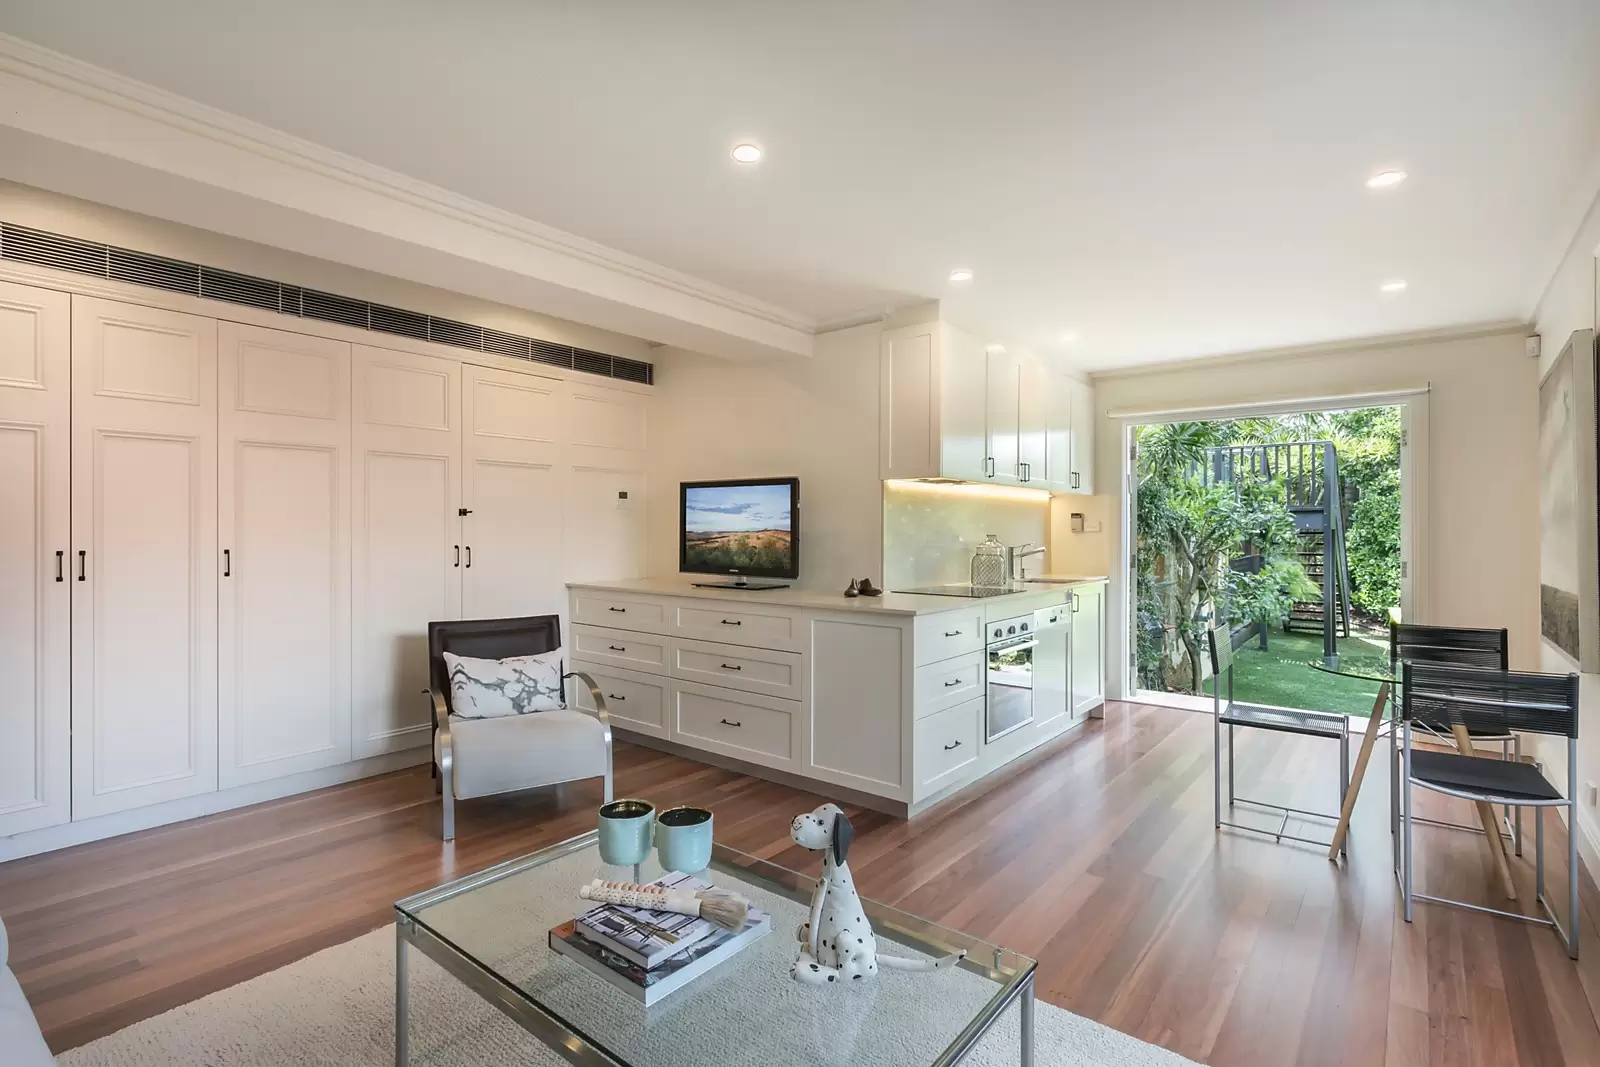 Photo #8: 3 Tarrant Avenue, Bellevue Hill - Sold by Sydney Sotheby's International Realty